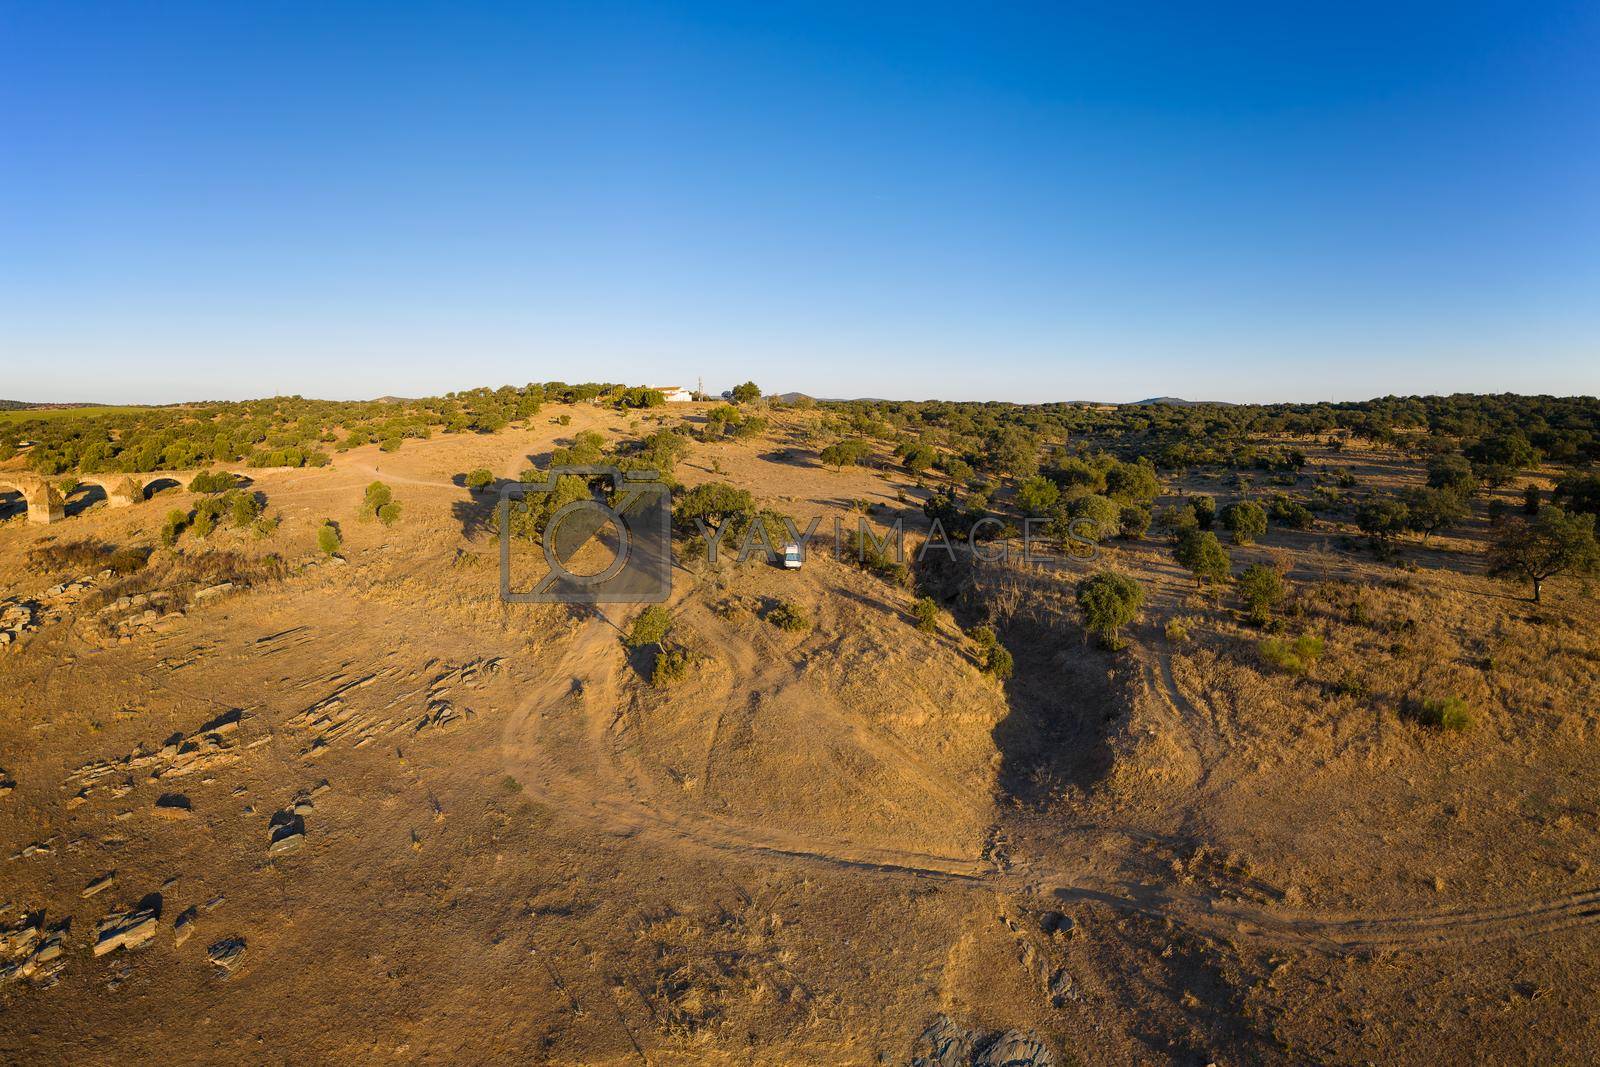 Royalty free image of Camper van drone aerial view alone on an Alentejo landscape between the trees, in Portugal by Luispinaphotography